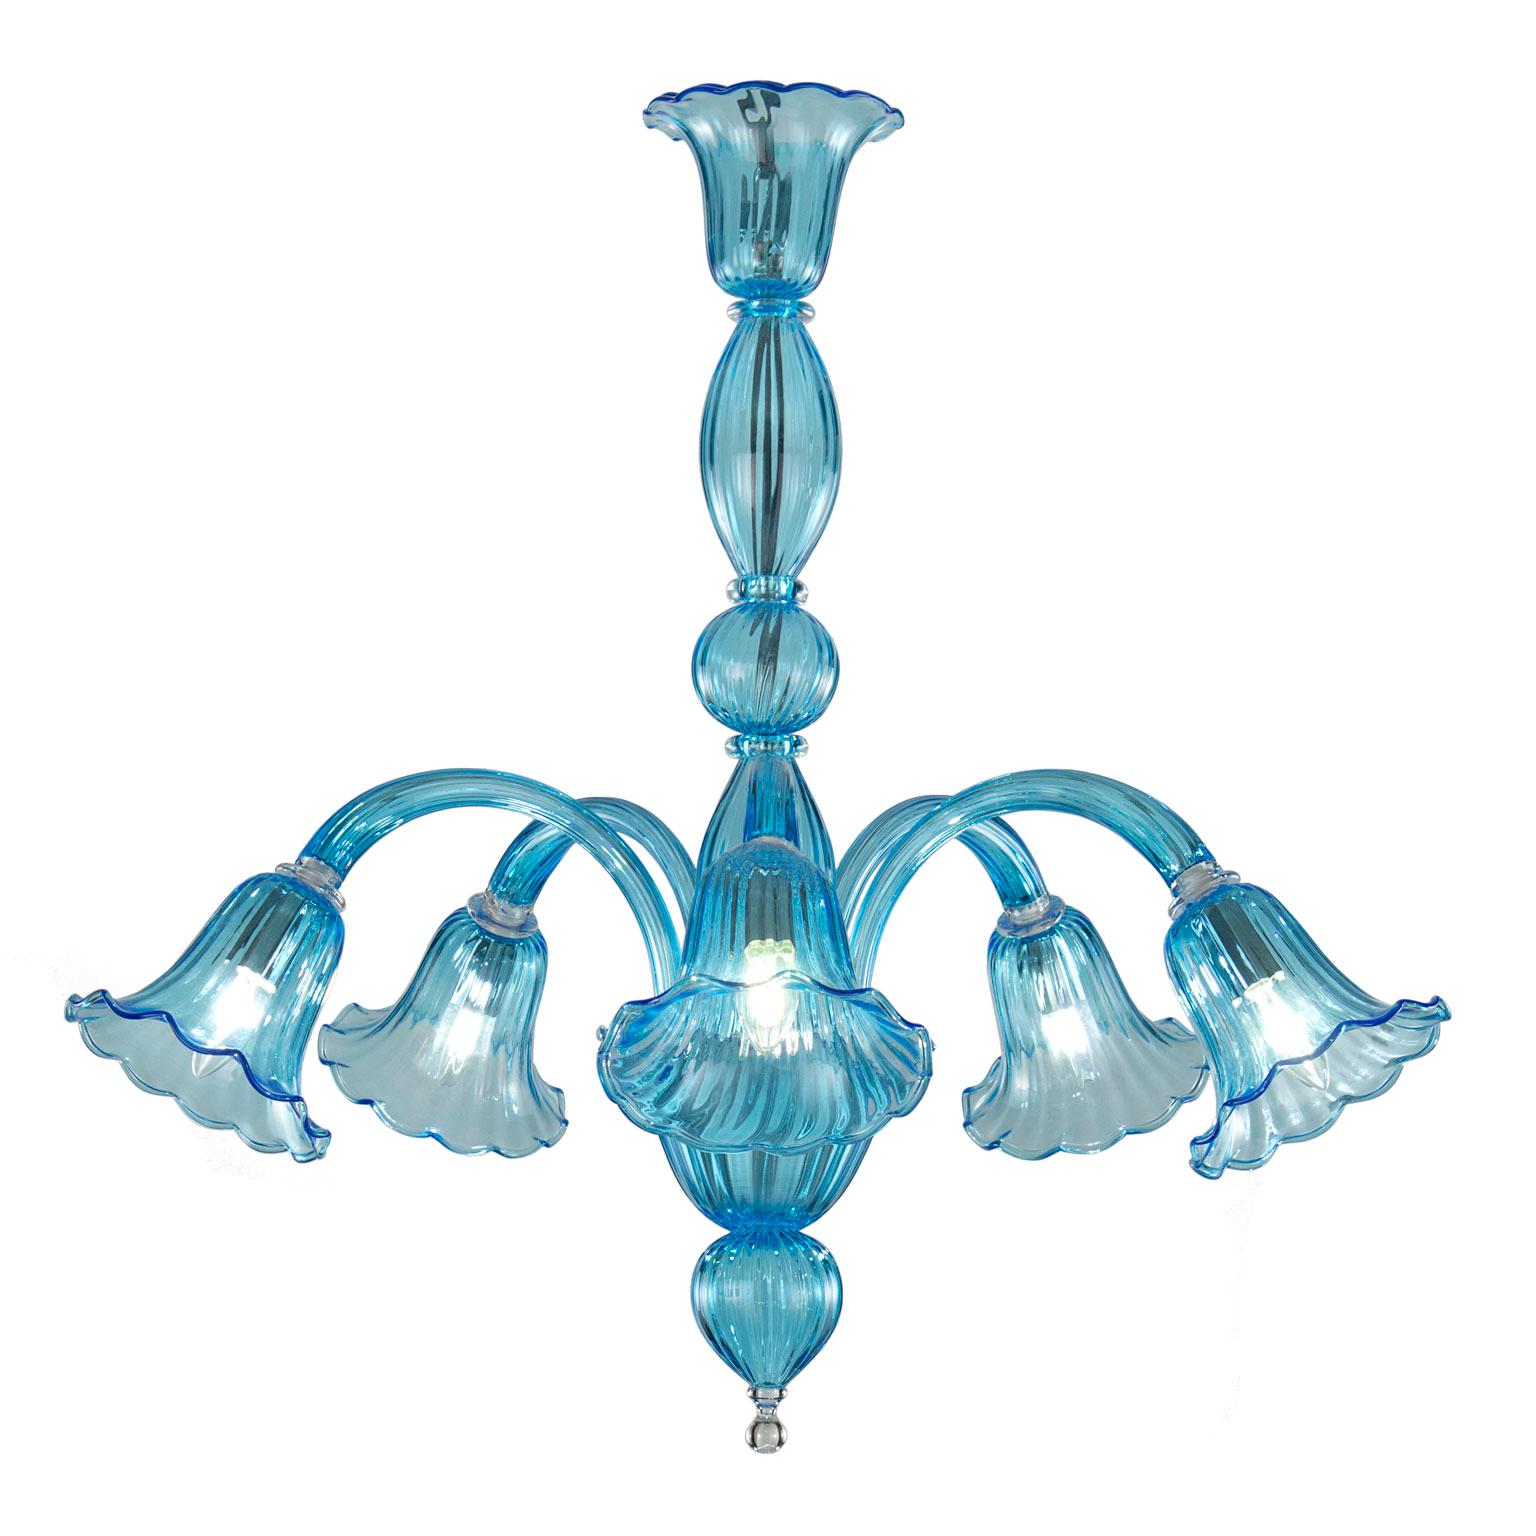 Multiforme Bellepoque chandelier 5 lights, light blue color Murano glass

Bellepoque 364 from the Timeless collection is a chandelier that evokes the atmosphere of the beginning of the 19th century. The cups recall floral elements, thus giving to